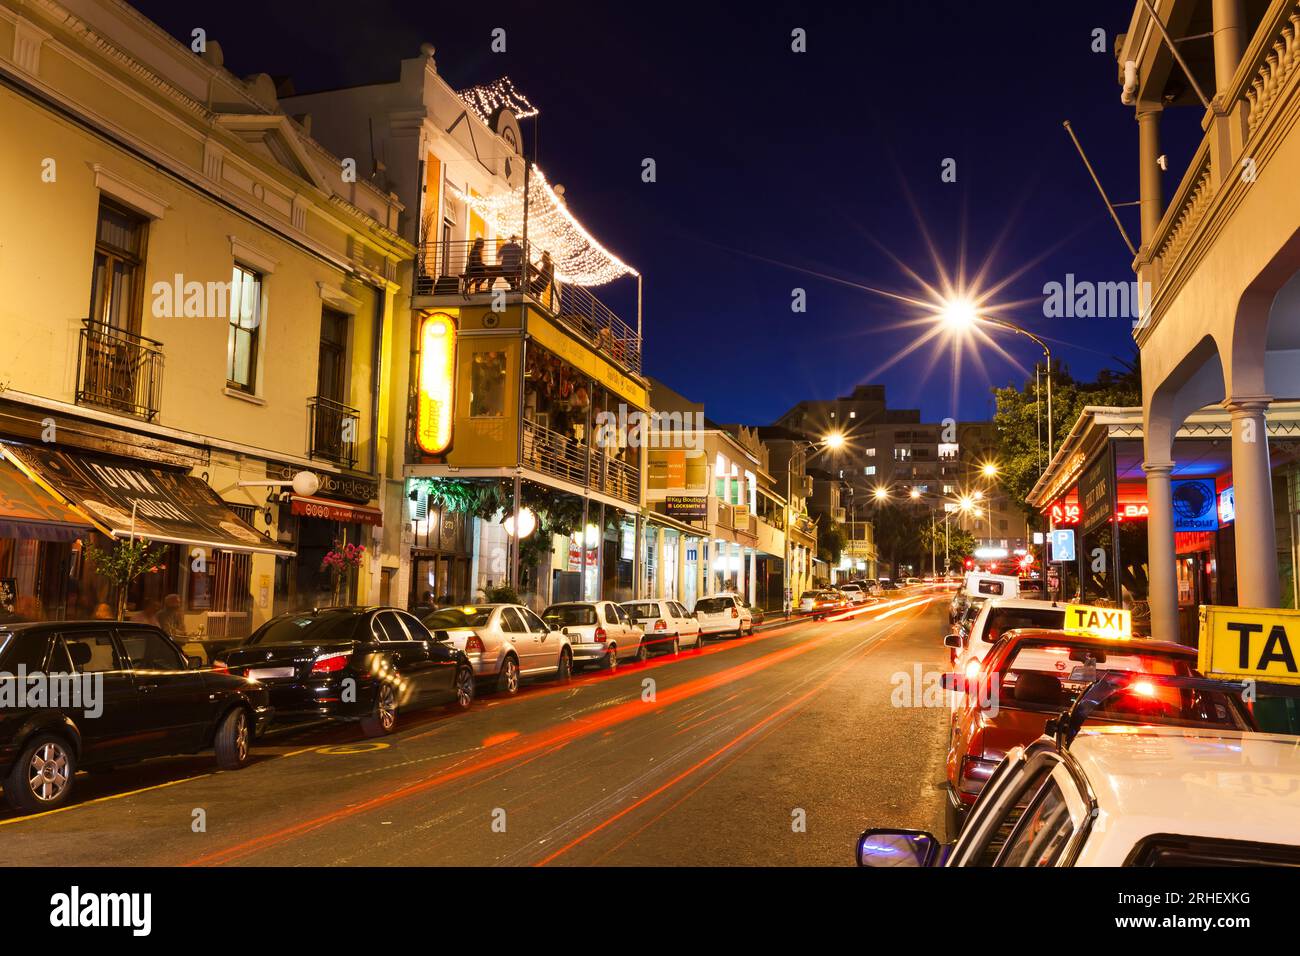 Night photograph of Long street in Cape Town South Africa with lights and buildings nightlife hustle bustle Stock Photo